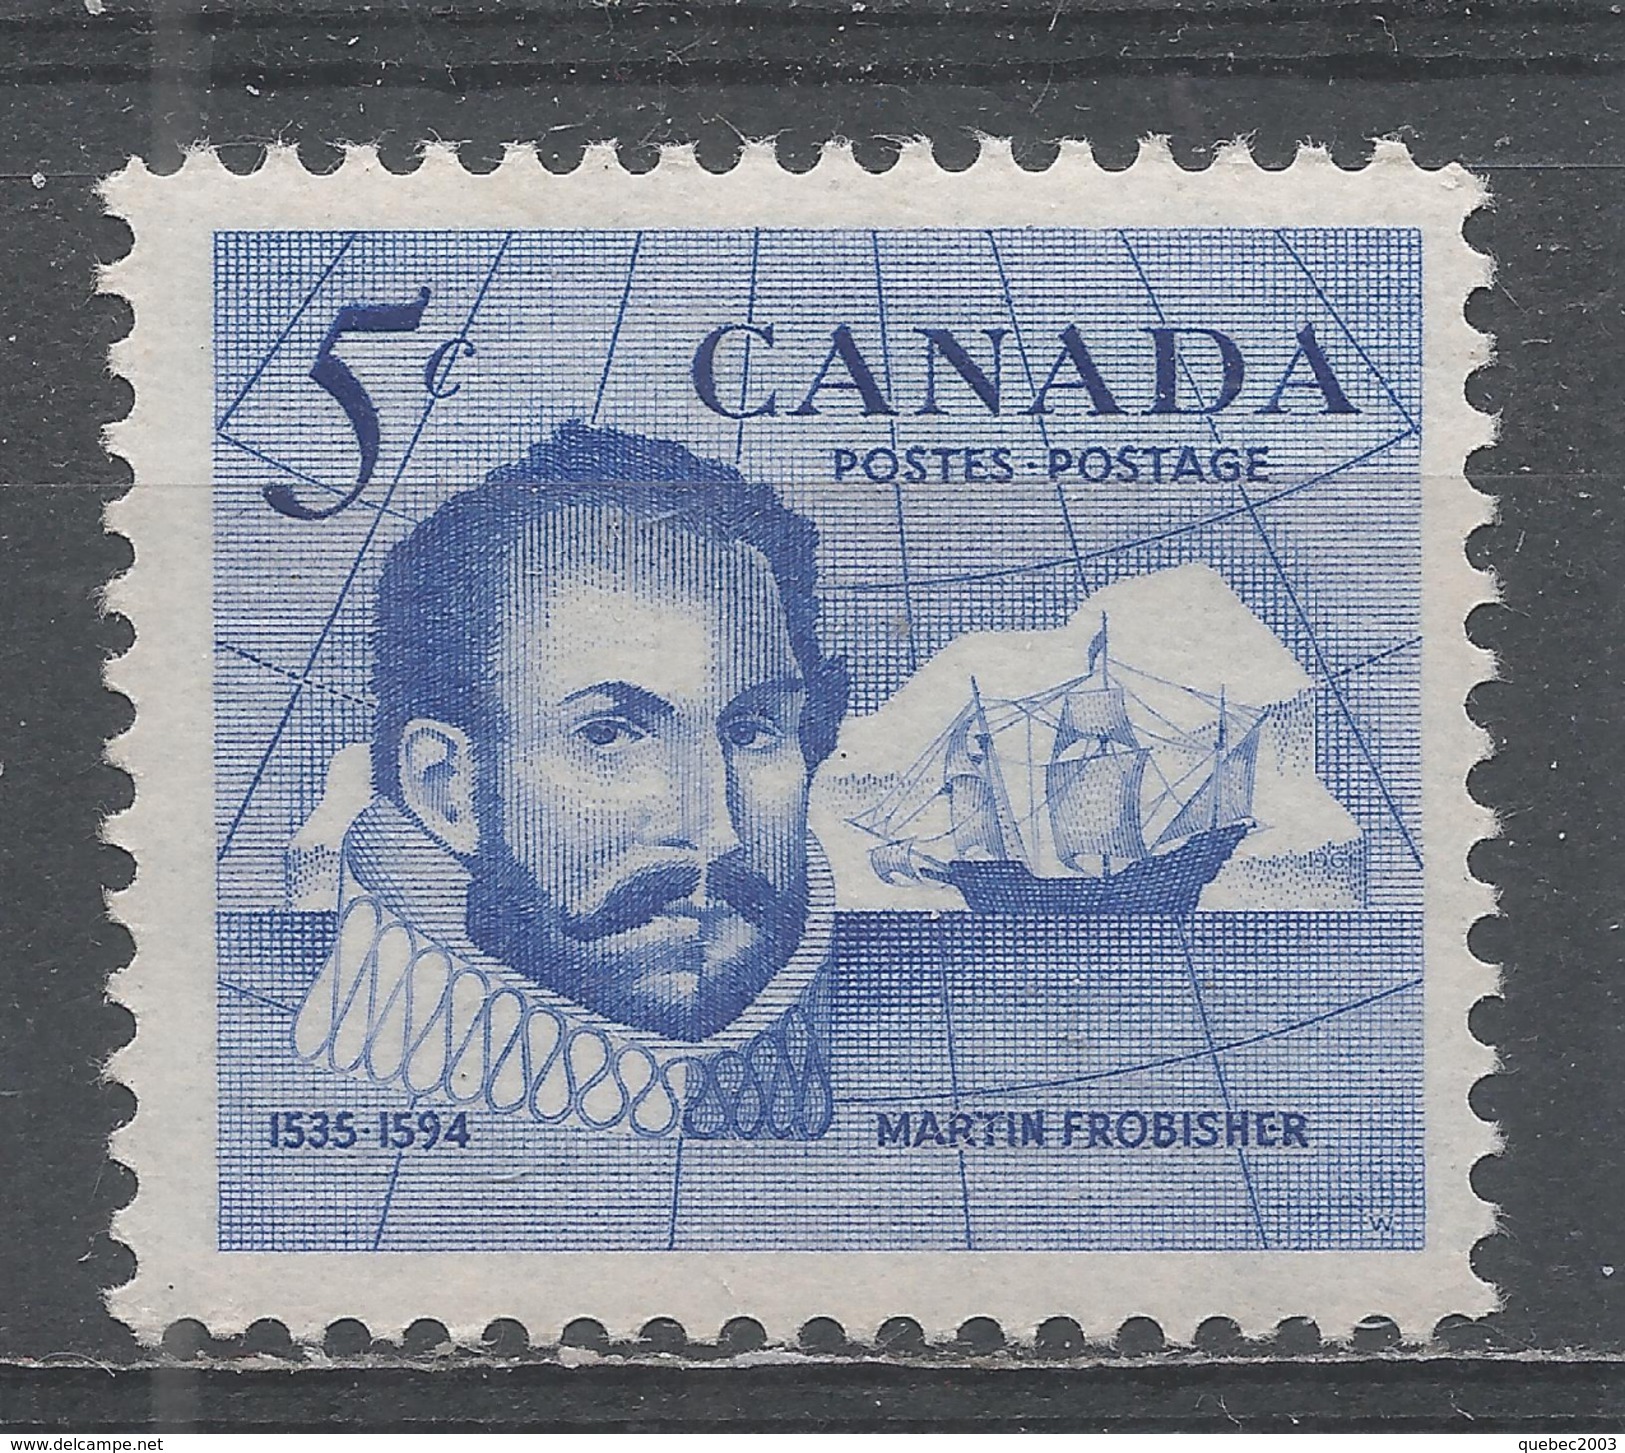 Canada 1963. Scott #412 (MNH) Sir Martin Frobisher (1535-1594) Explorer And Discoverer Of Frobisher Bay ** Complet Issue - Neufs